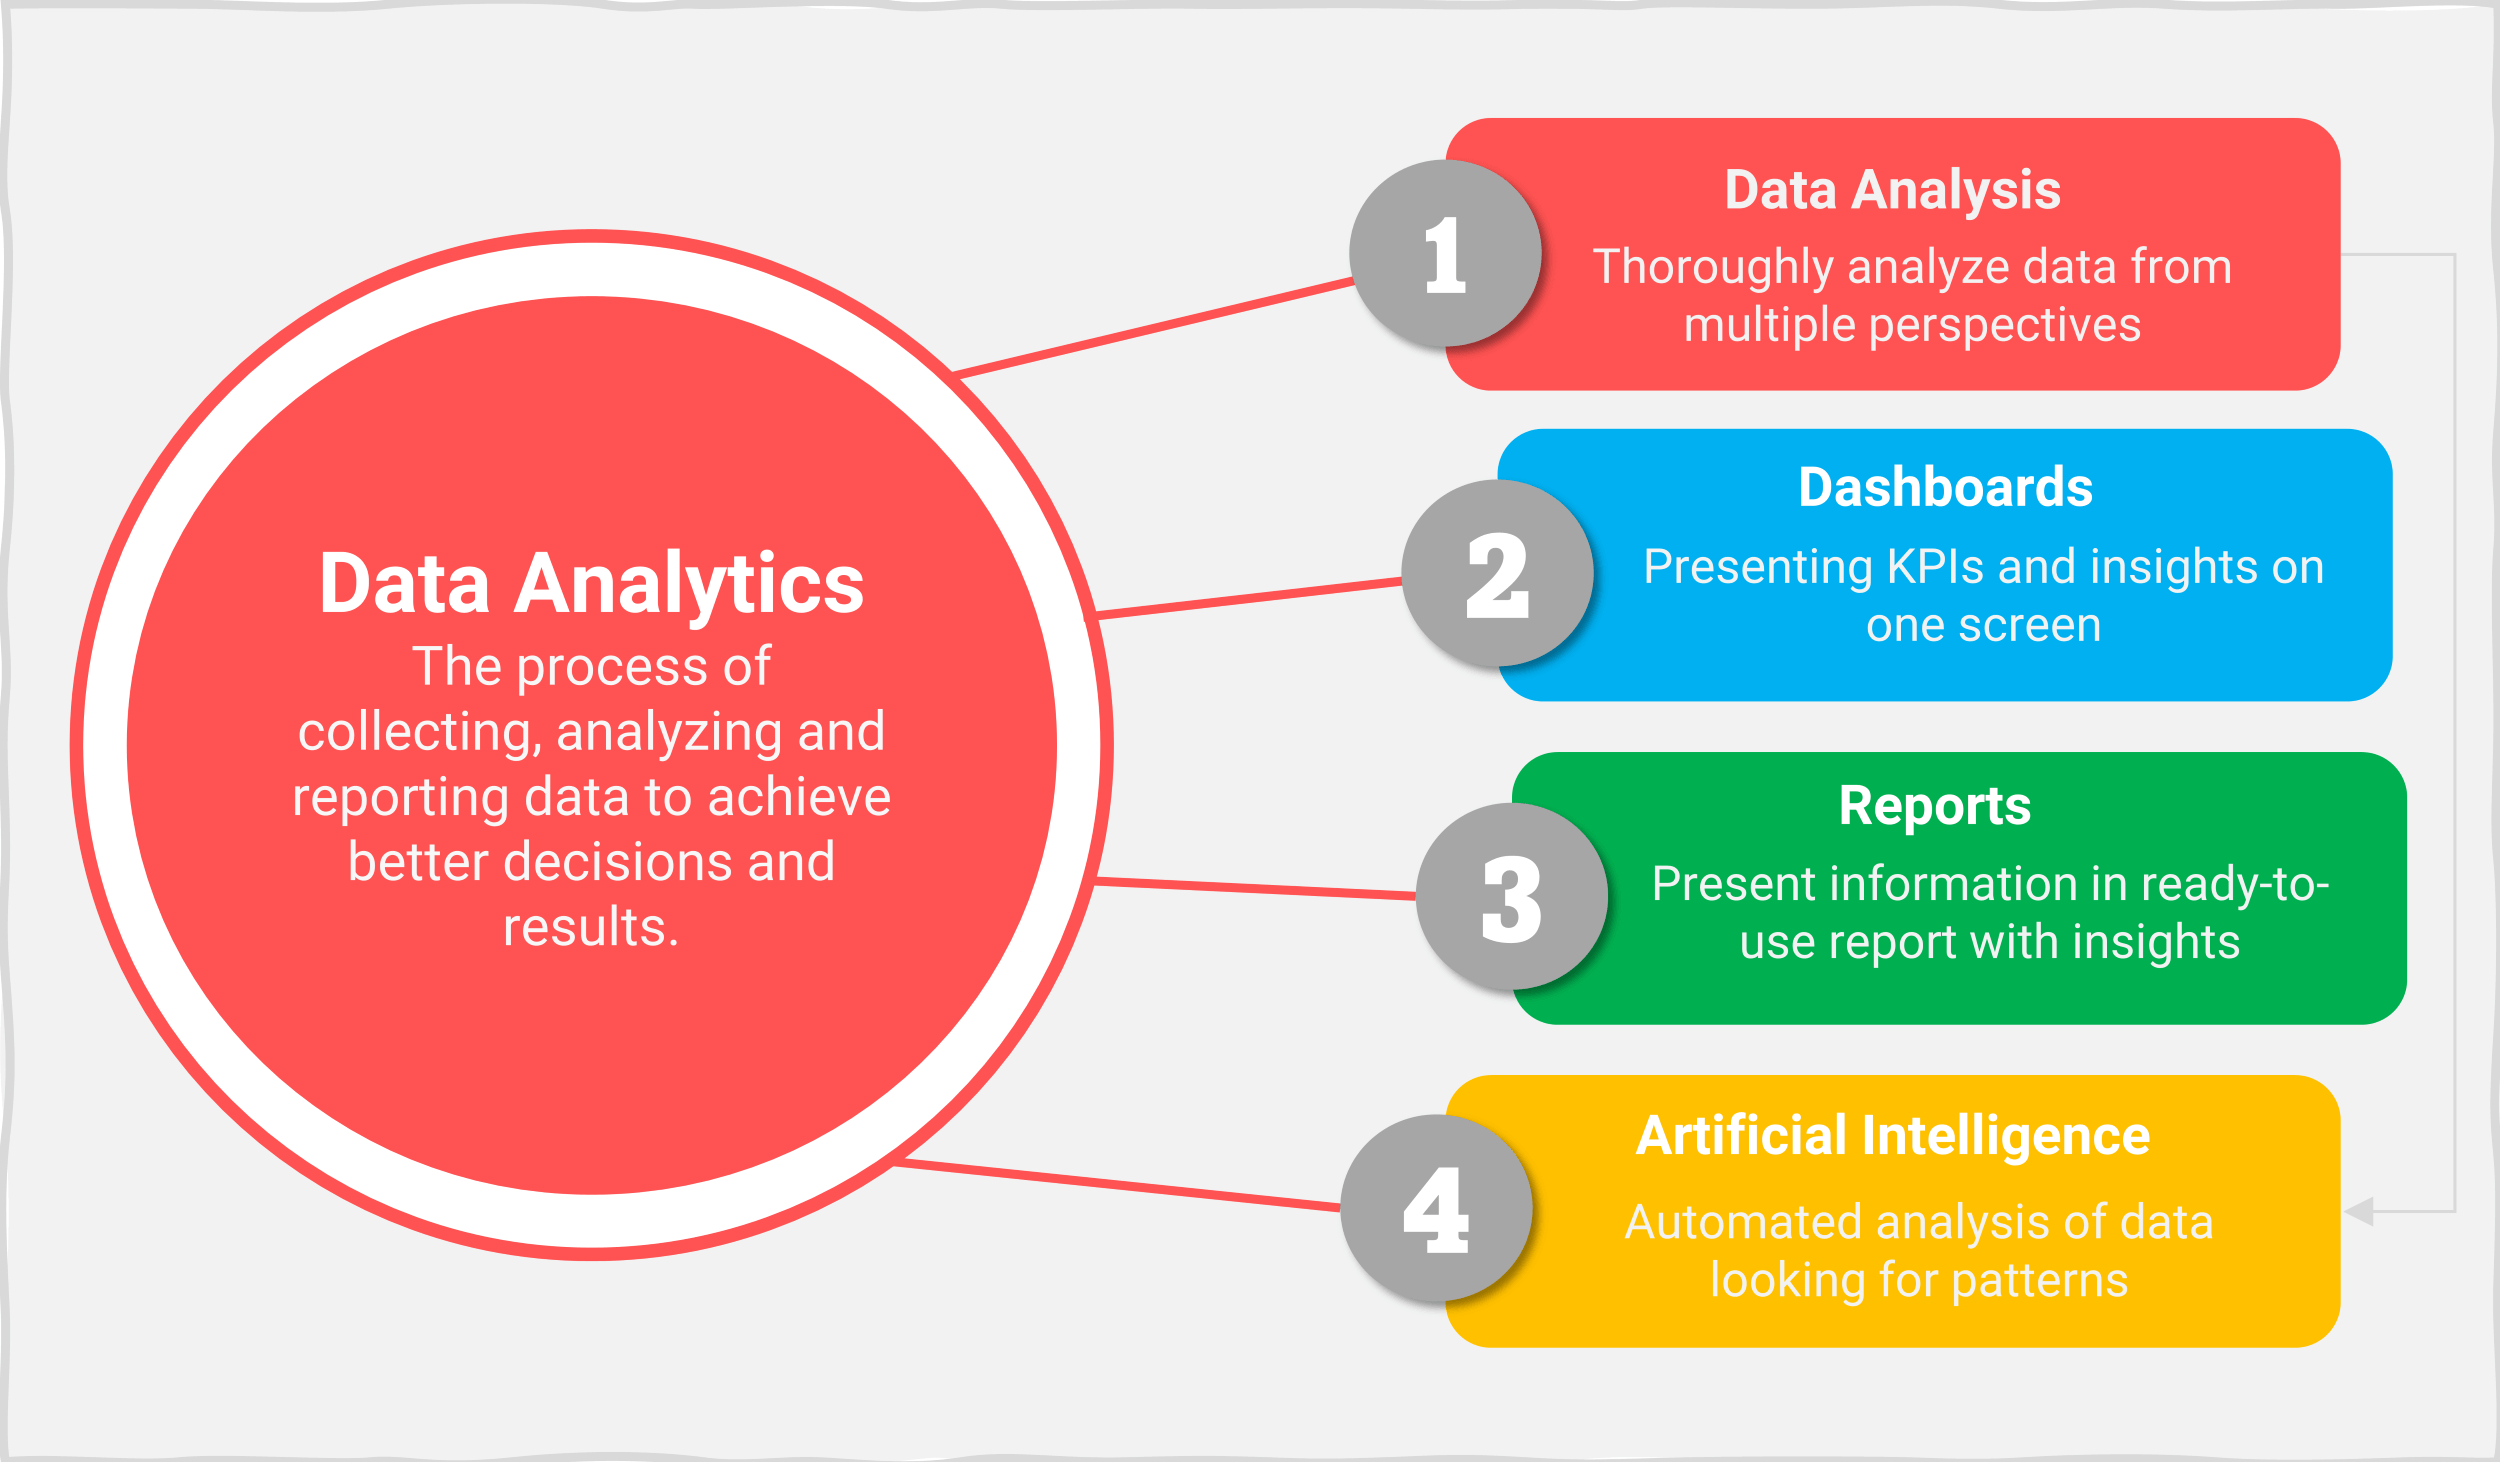 what is analysis data